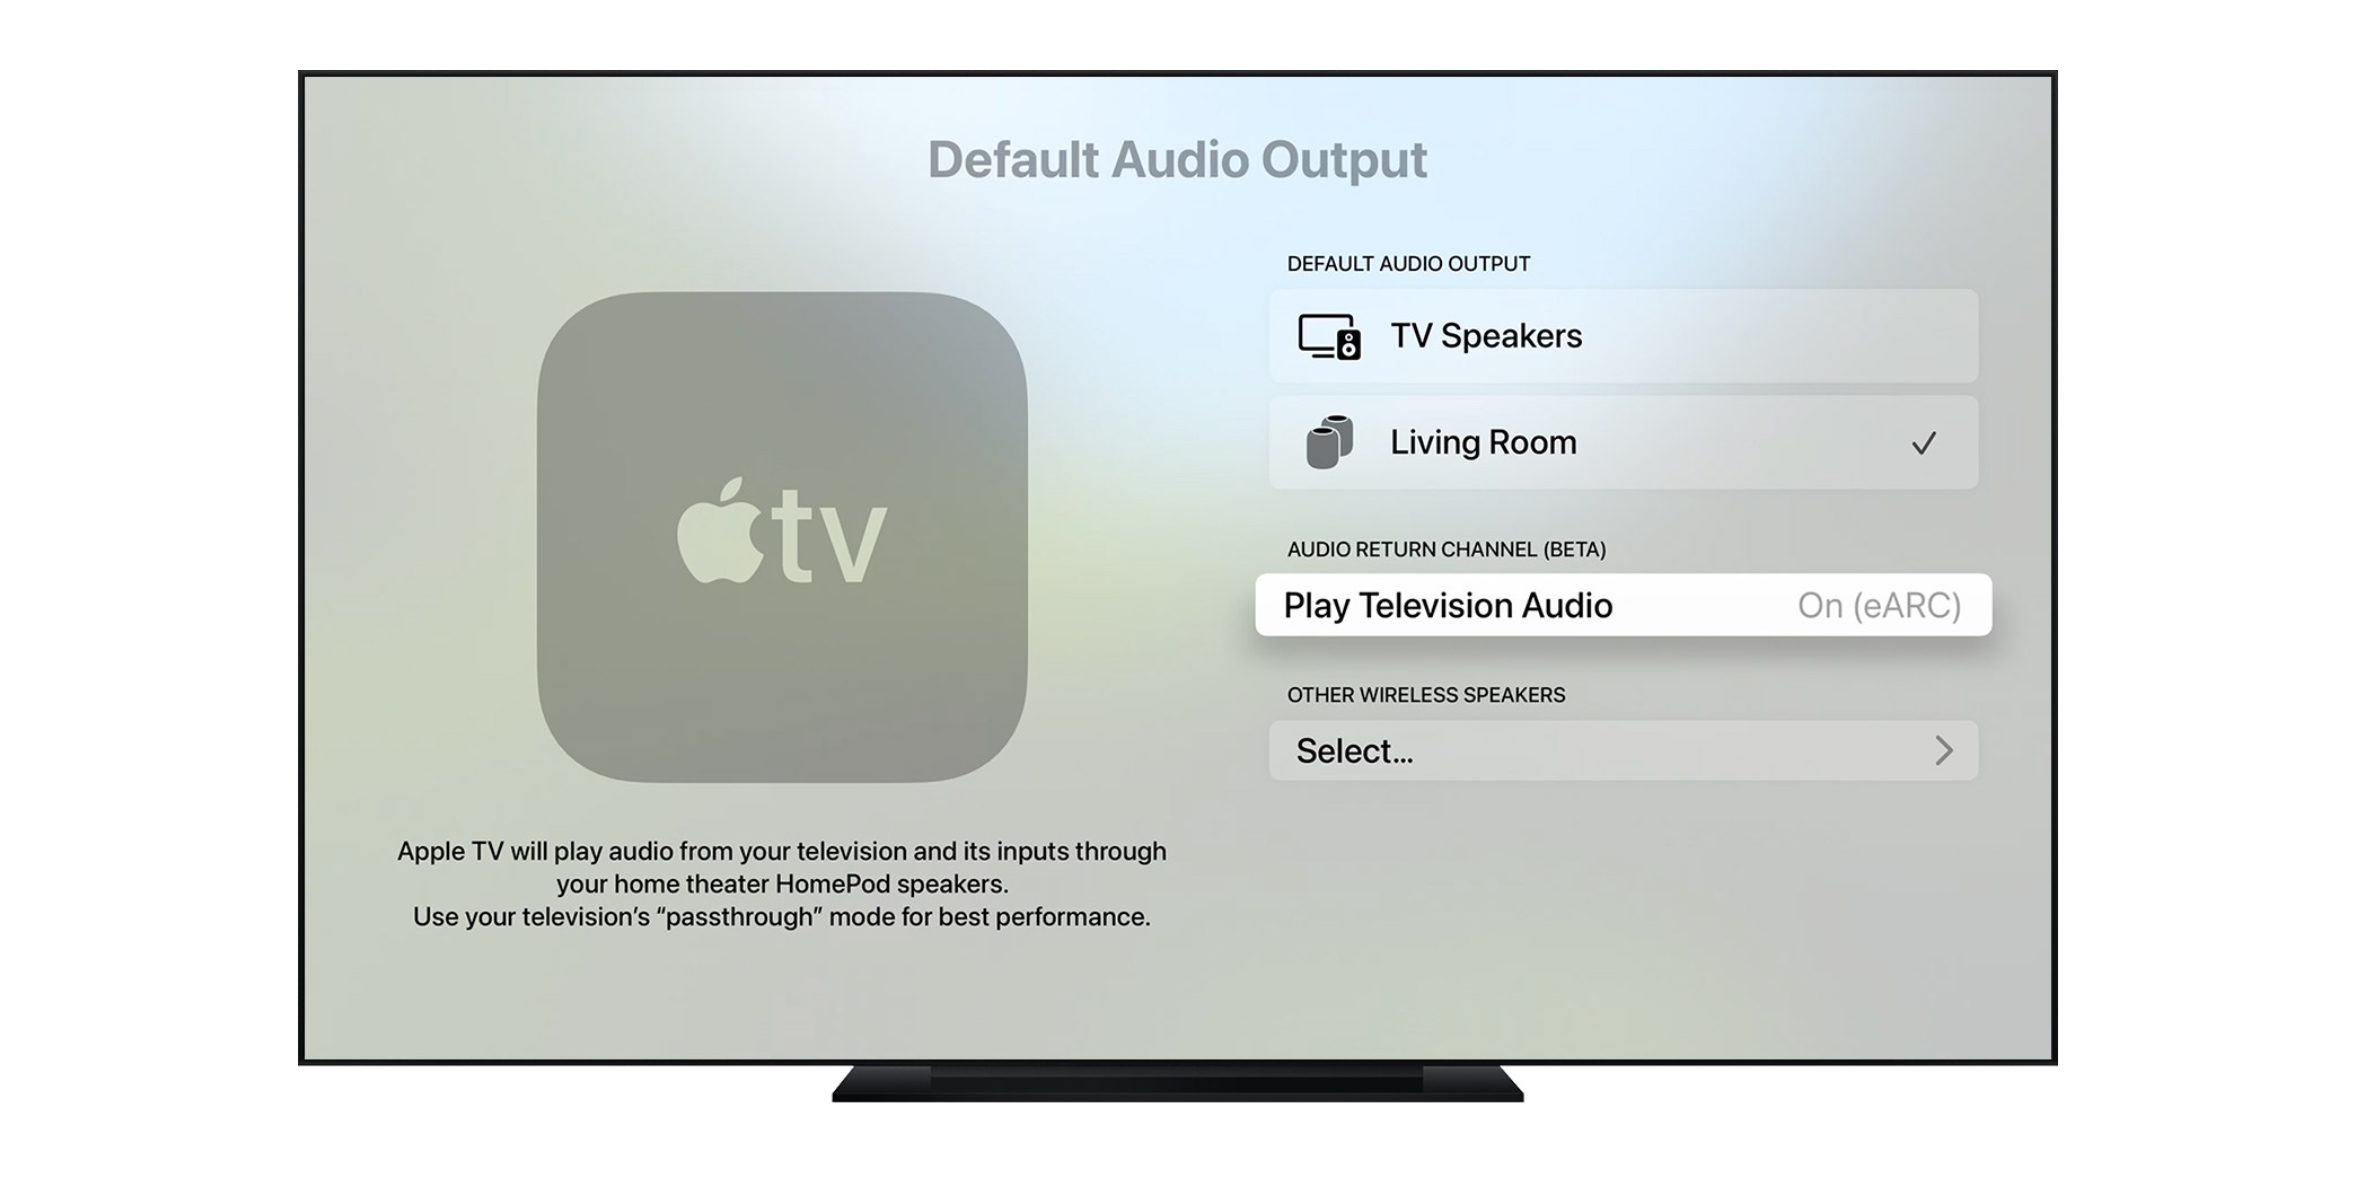 Apple TV adds ARC support for universal TV audio passthrough to HomePod speakers 9to5Mac